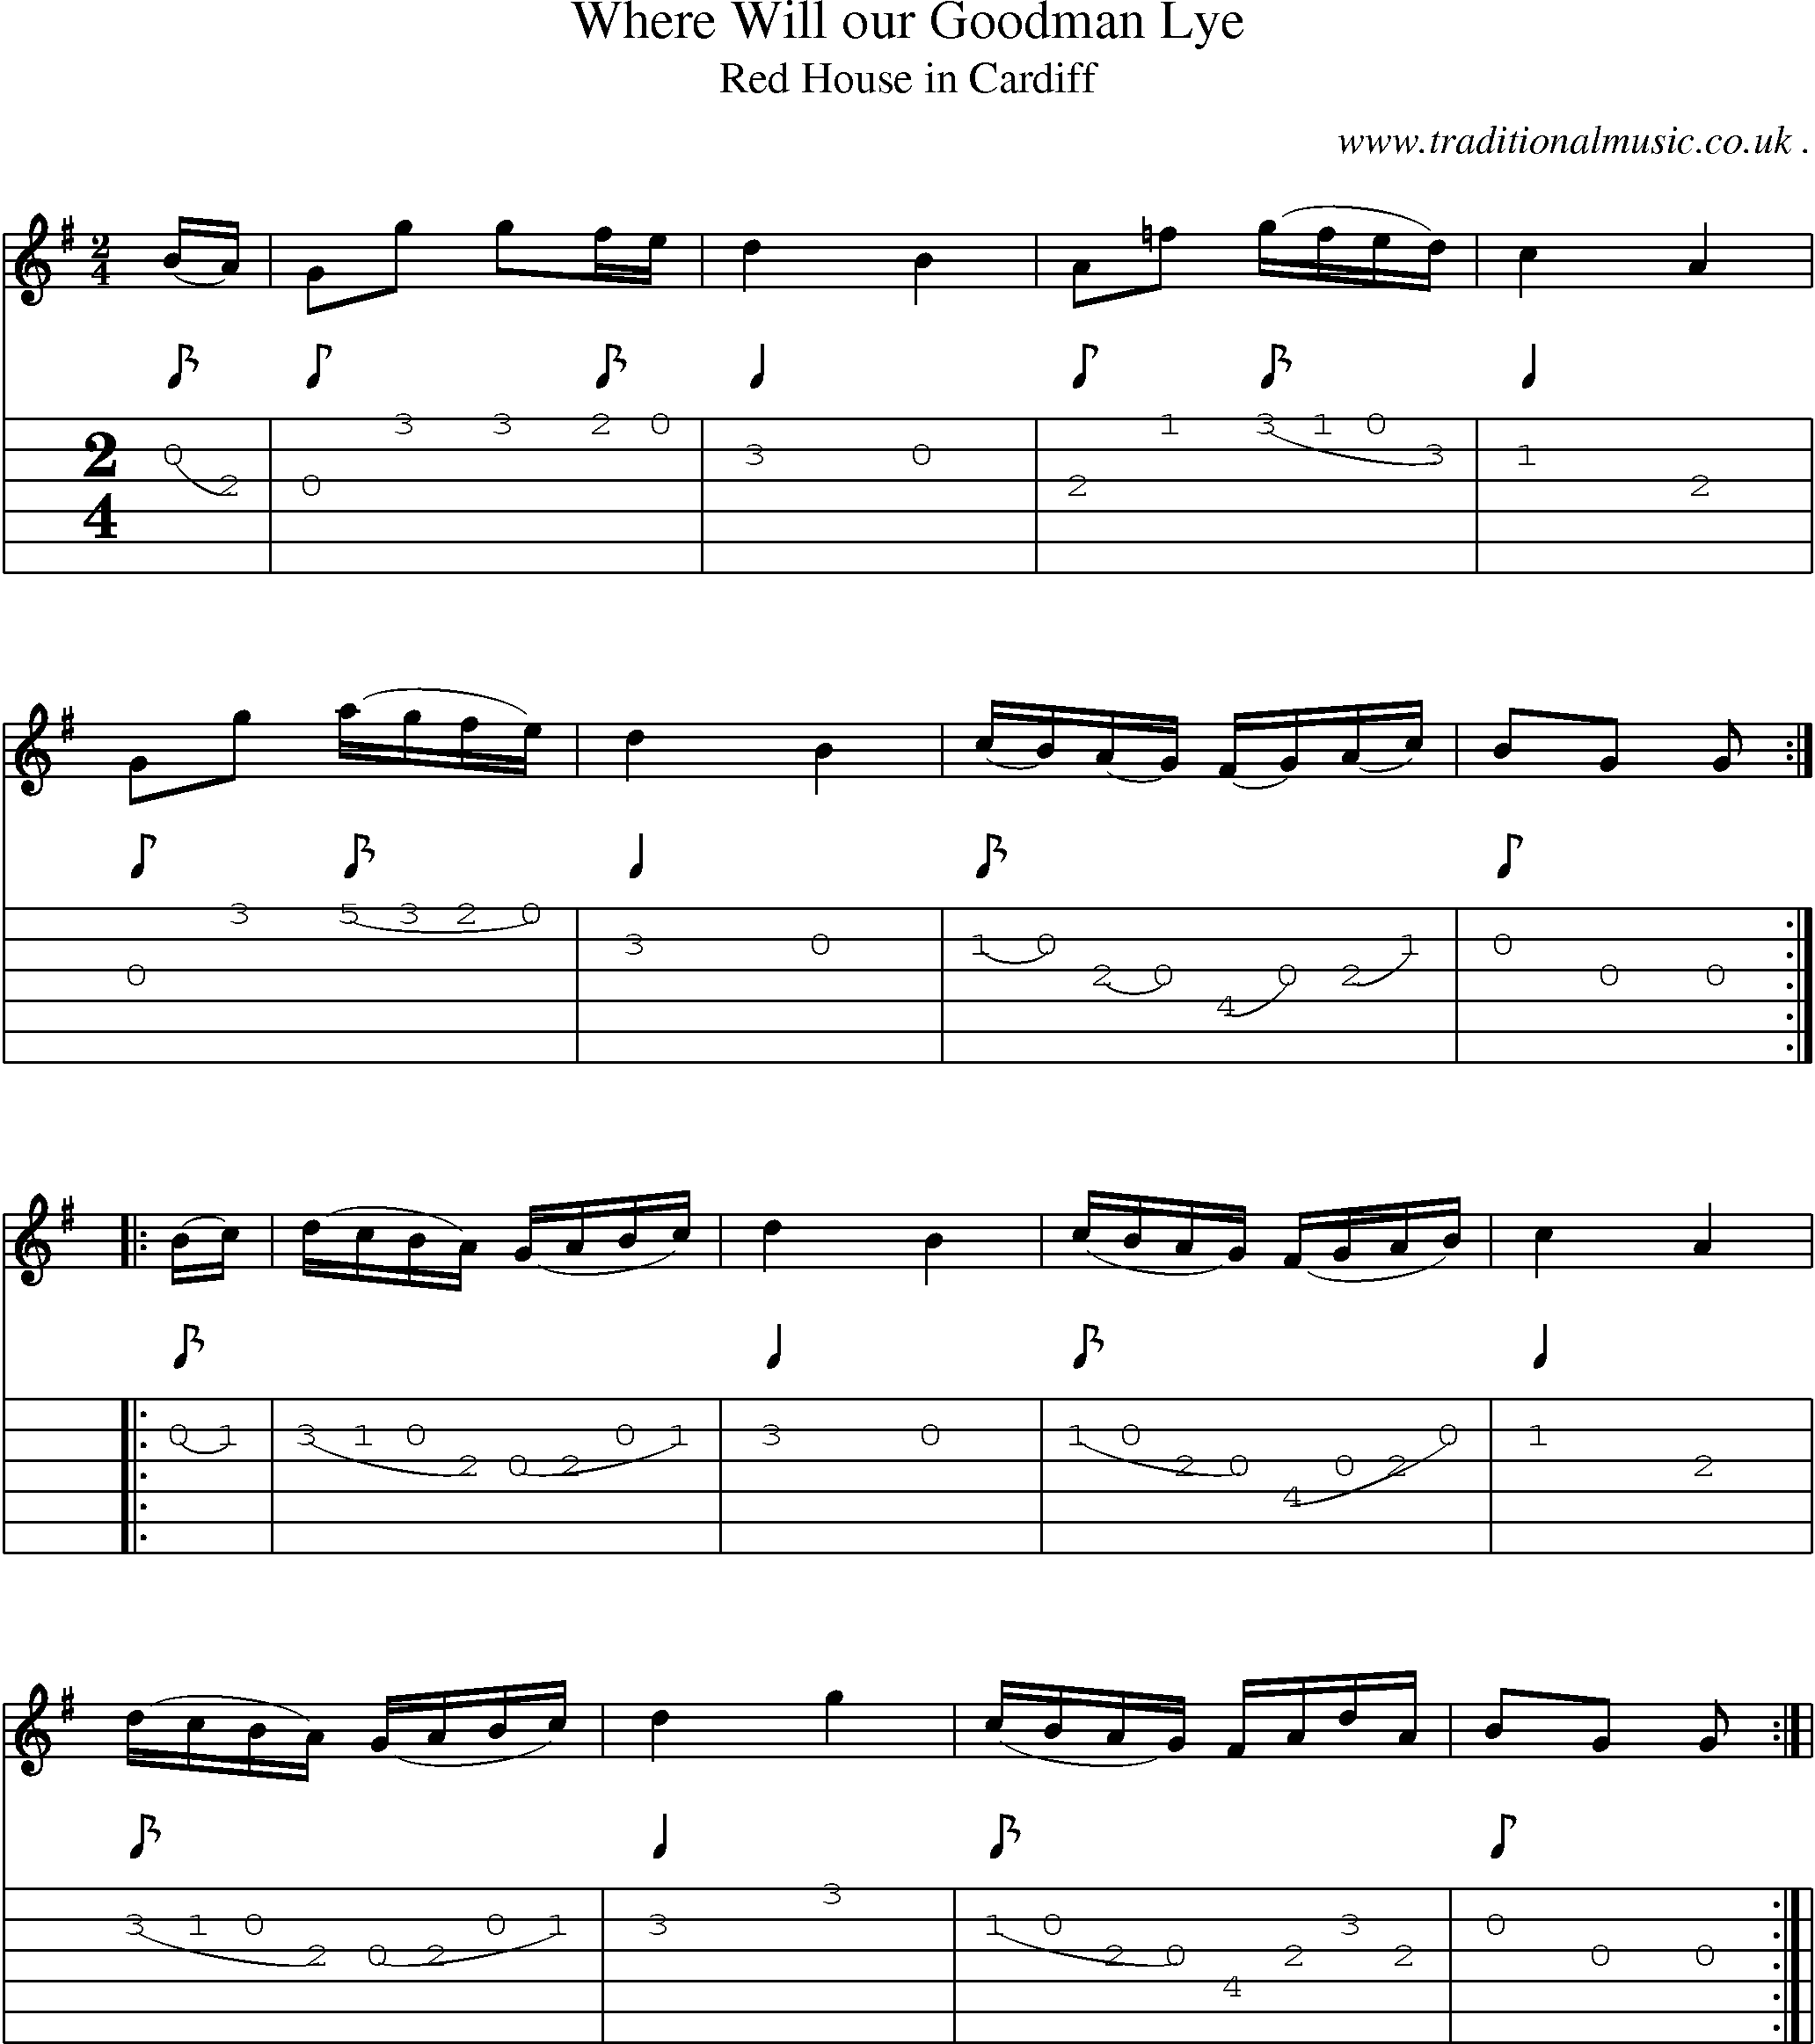 Sheet-Music and Guitar Tabs for Where Will Our Goodman Lye